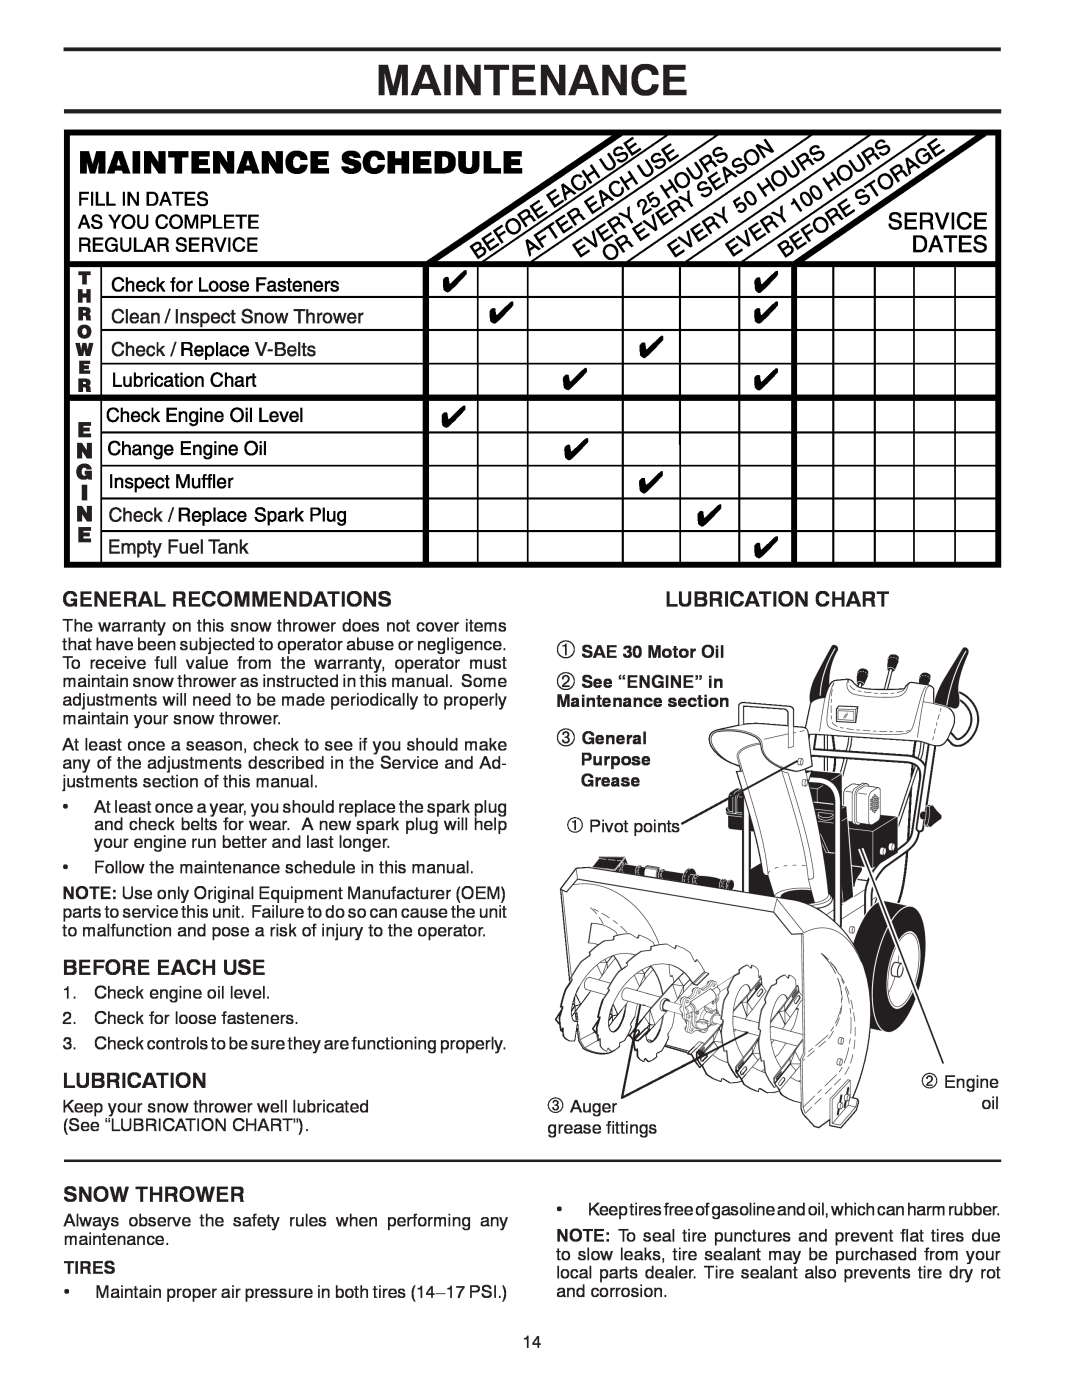 Poulan 437390, 96198003601 Maintenance, General Recommendations, Before Each Use, Snow Thrower, Lubrication Chart 